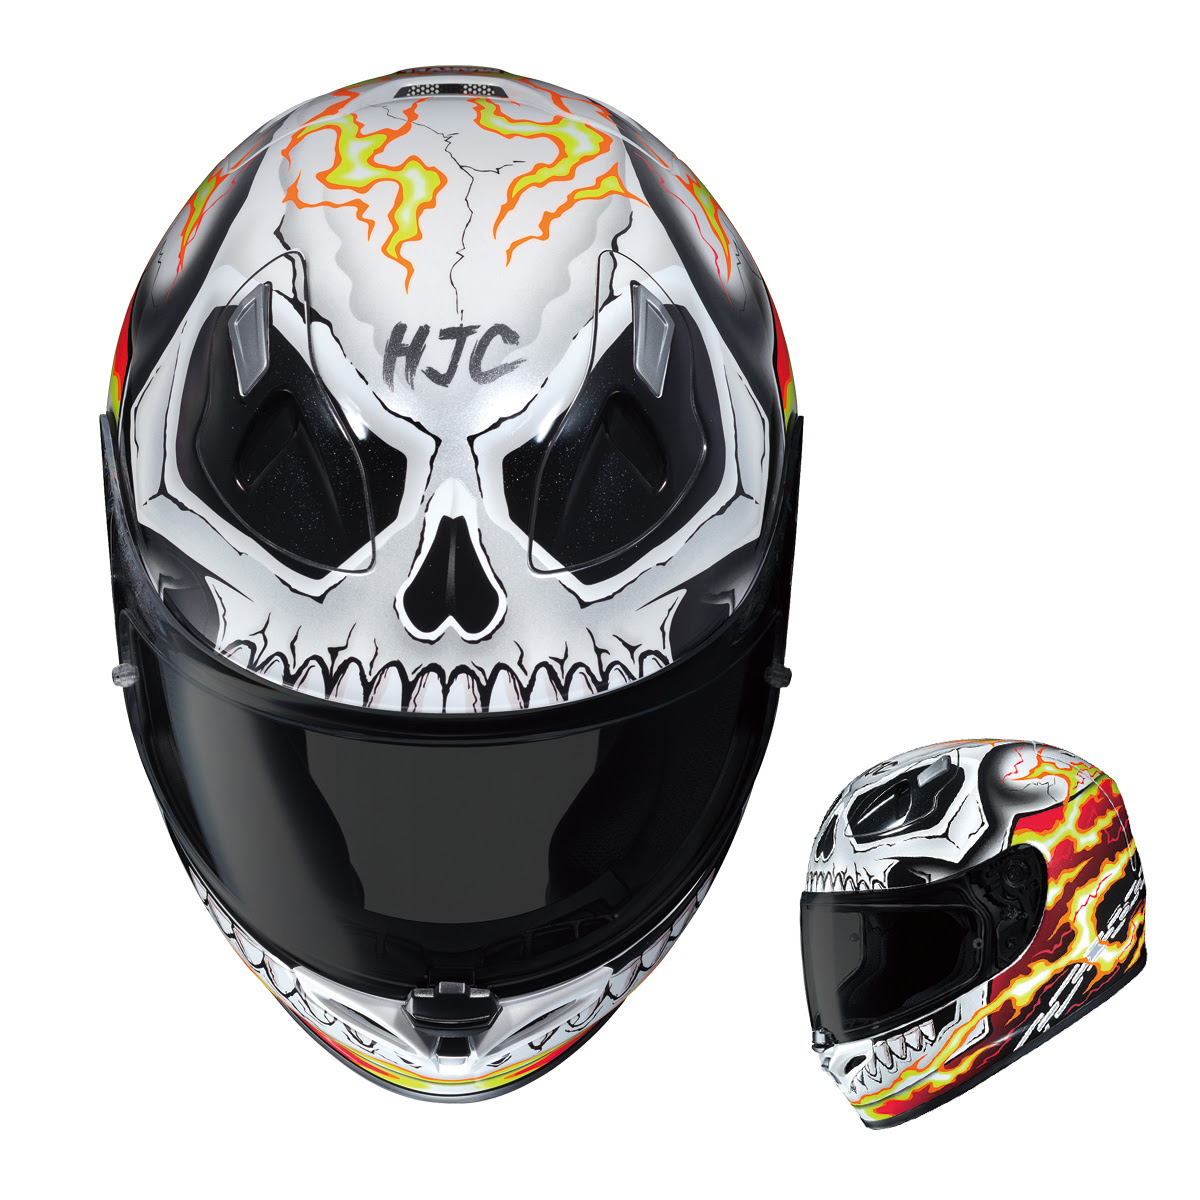 HJC Helmets Unisex-Adult Full-face Style Ghost Rider Motorcycle Helmet White/Red Large 650-914 